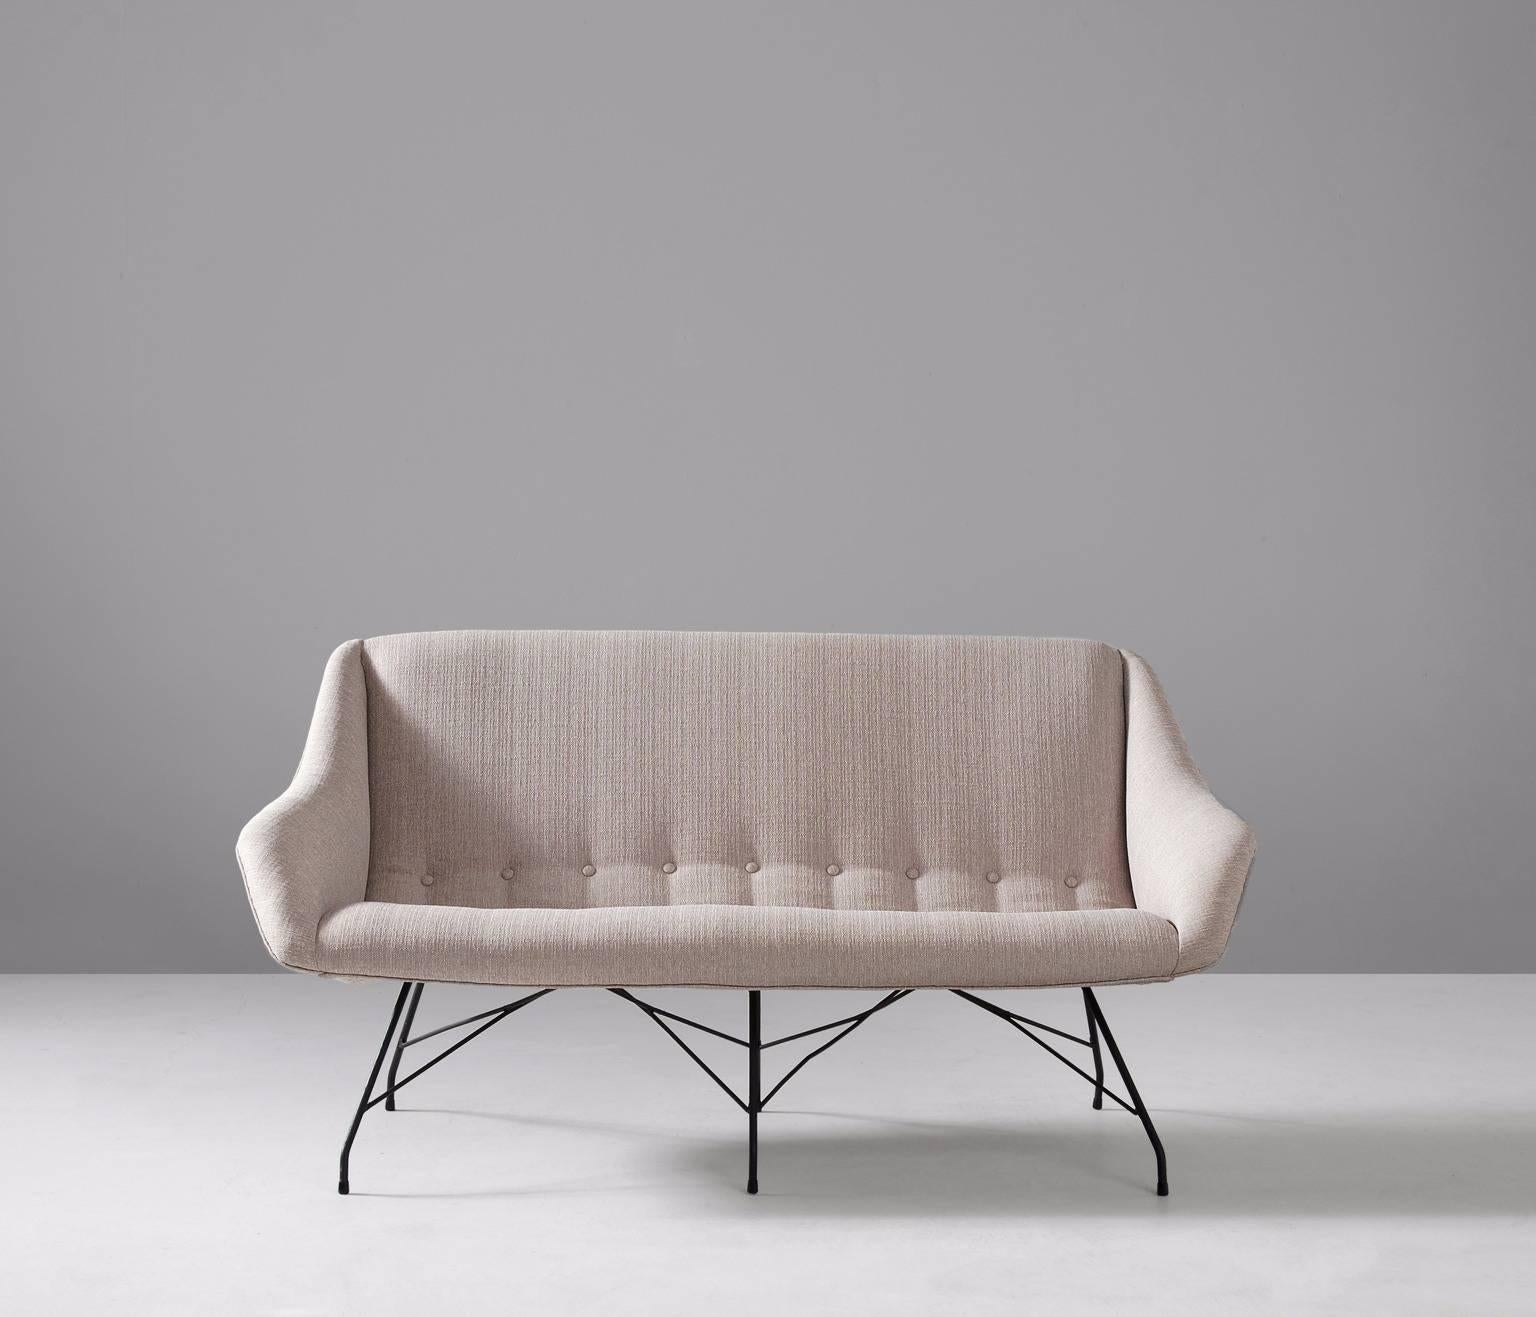 Two-seat sofa in black painted iron and fabric, by Carlo Hauner & Martin Eisler for Forma, Brazil, circa 1955. 

Elegant and modern two-seat sofa by Brazilian designer duo Hauner & Eisler. The frame is made from black painted iron. Due the